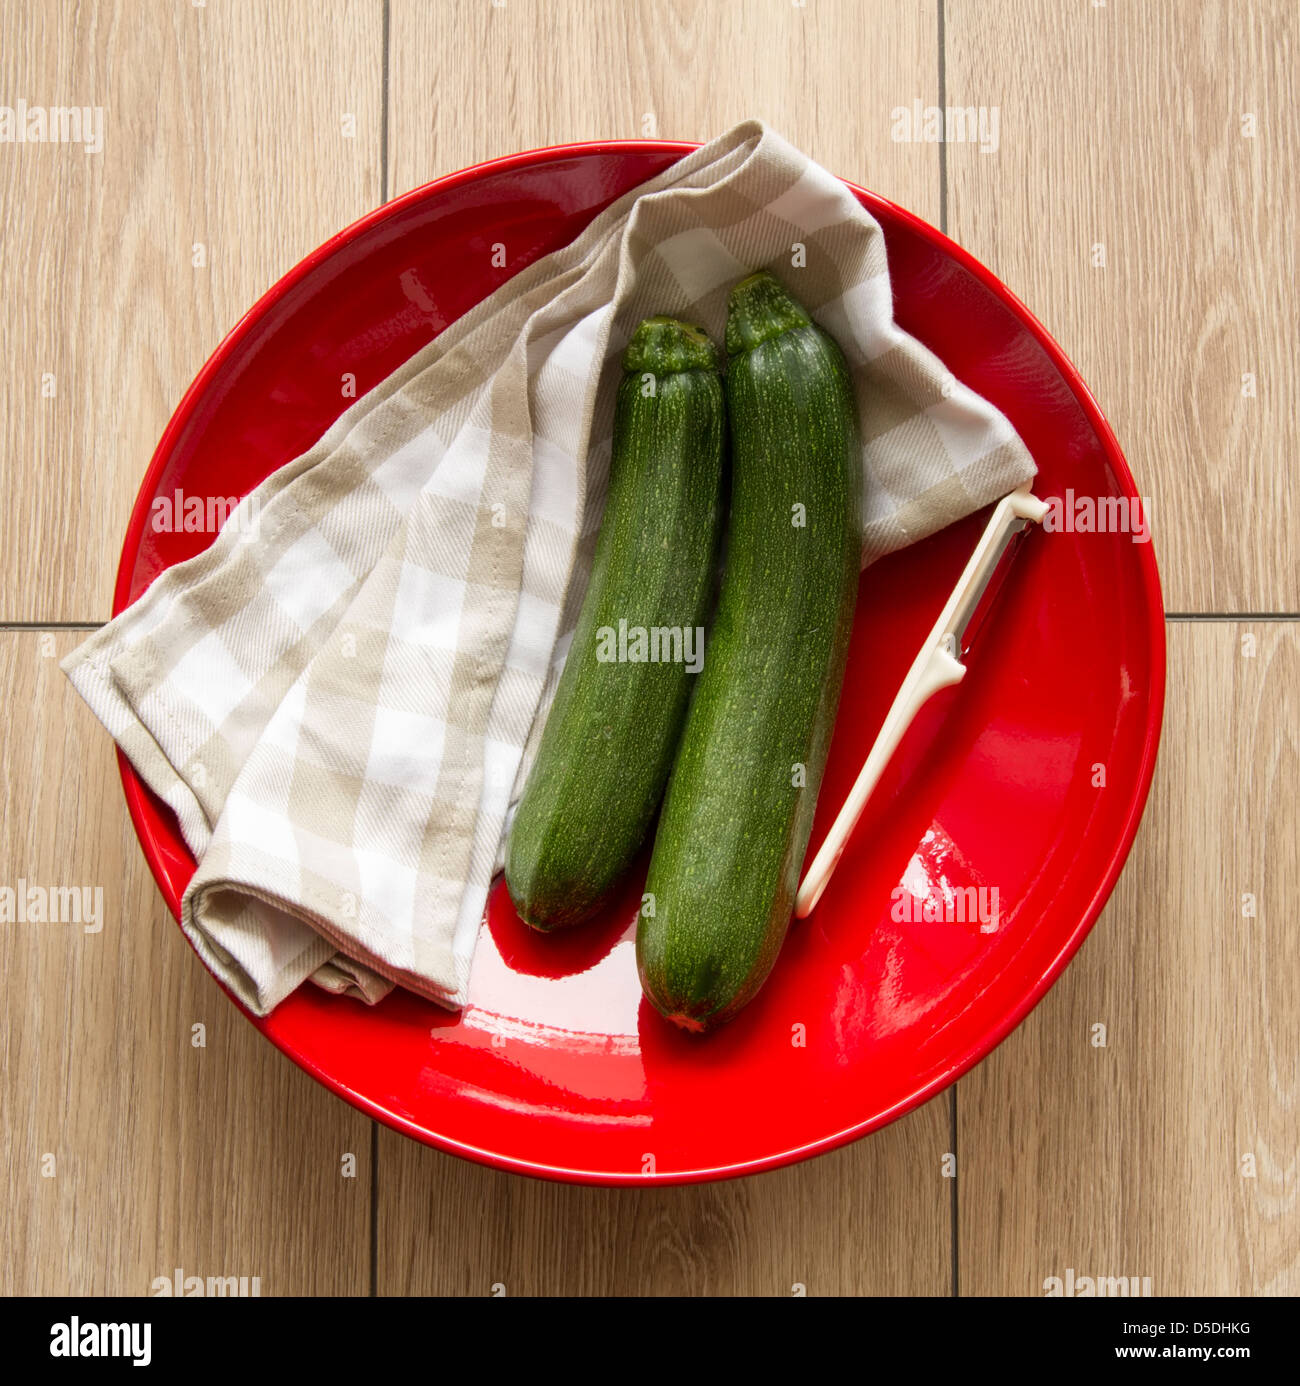 pair of green zucchini on red plate Stock Photo